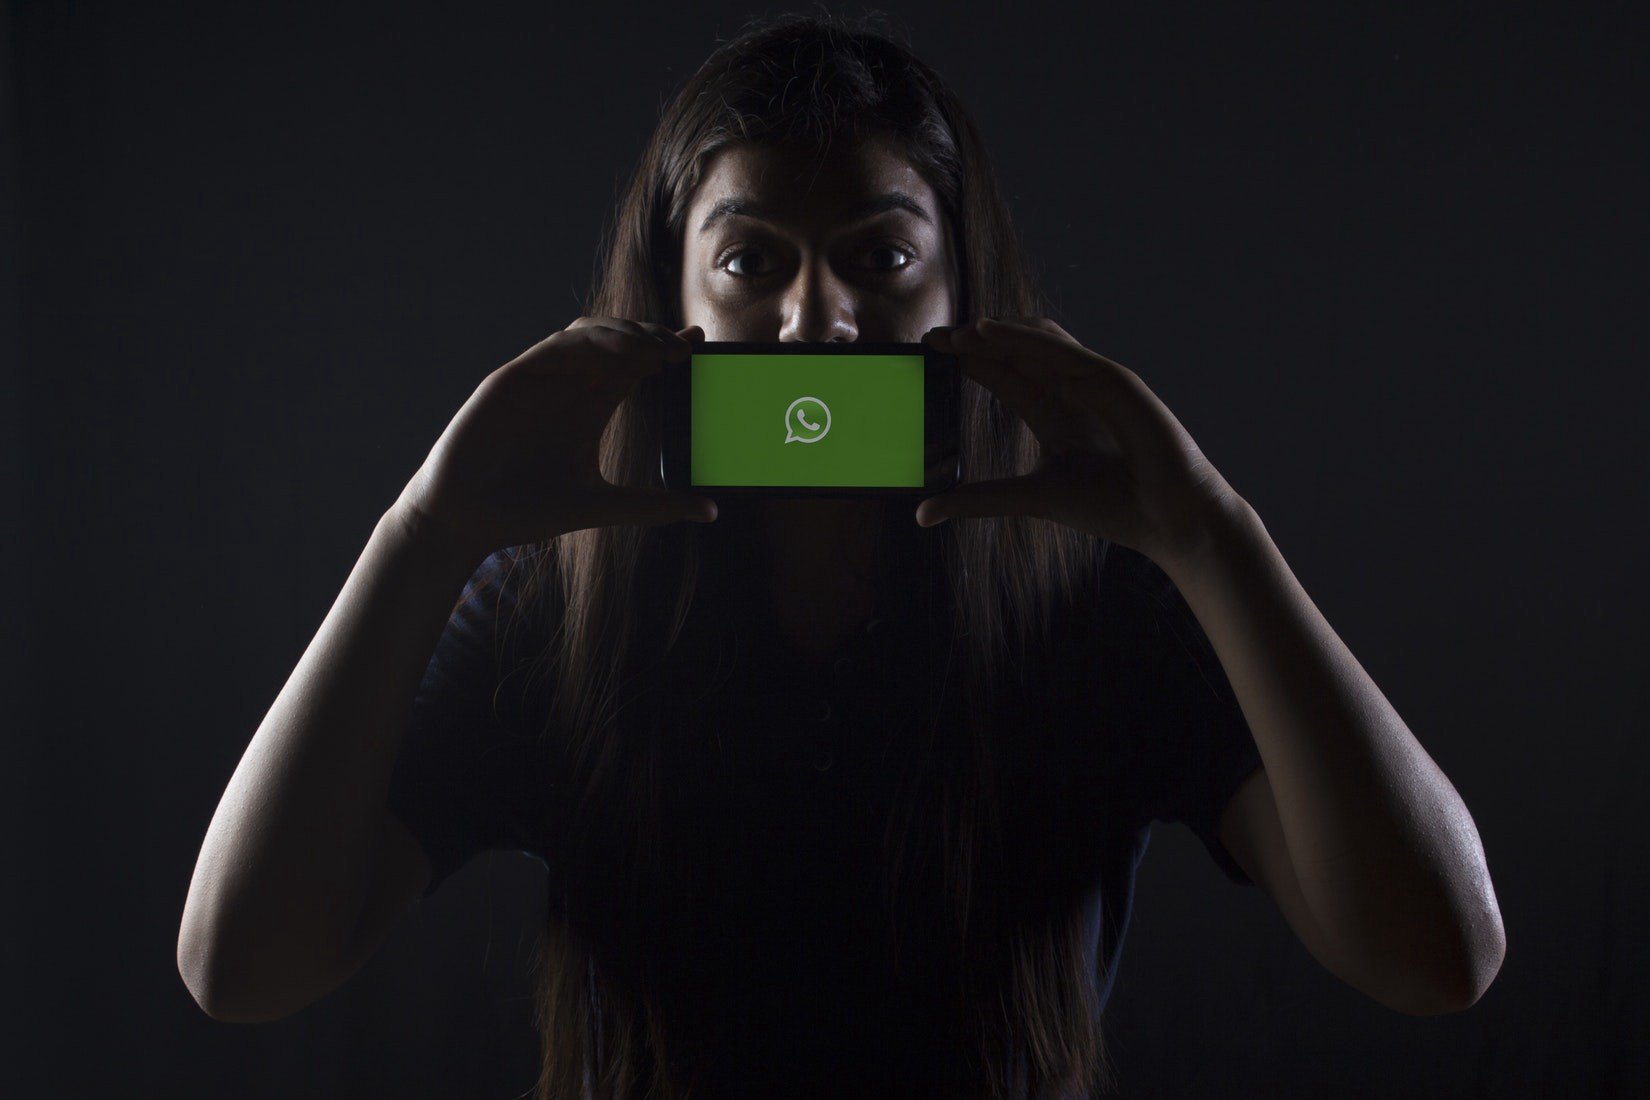 No, end-to-end encryption does not prevent Facebook from accessing WhatsApp chats